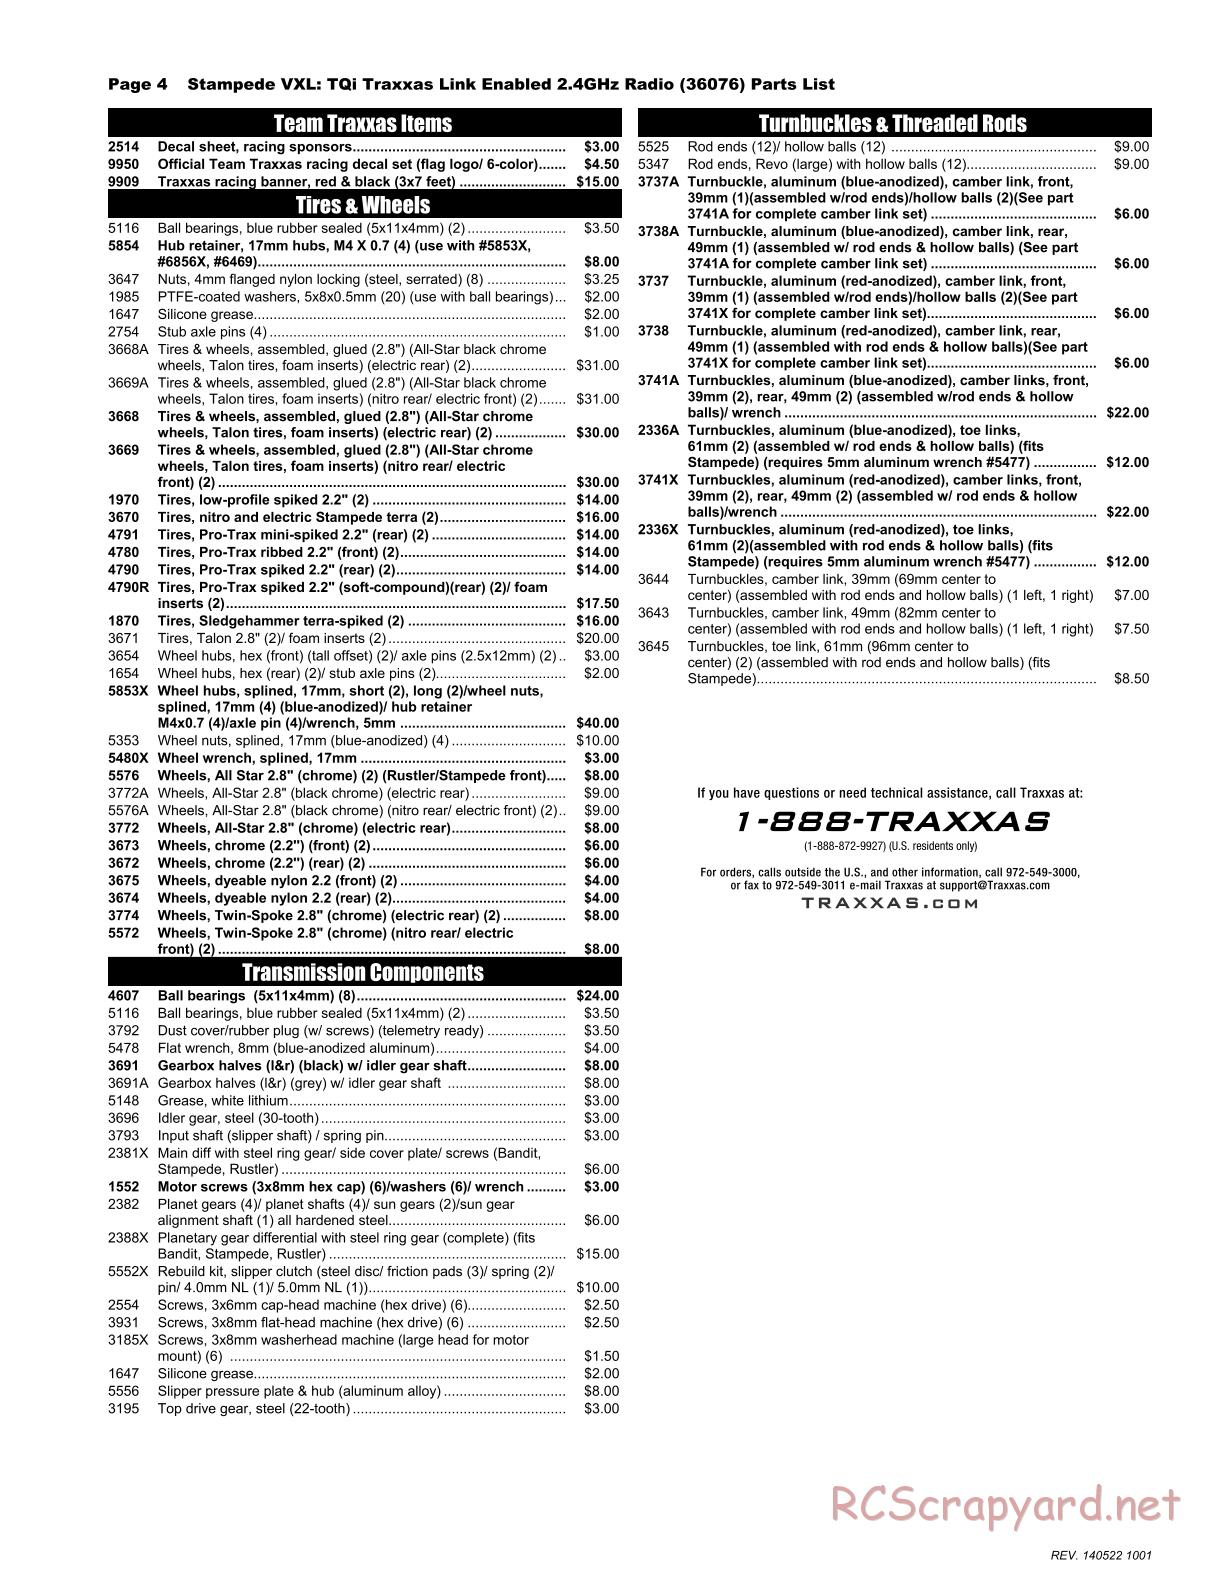 Traxxas - Stampede VXL - Parts List - Page 4